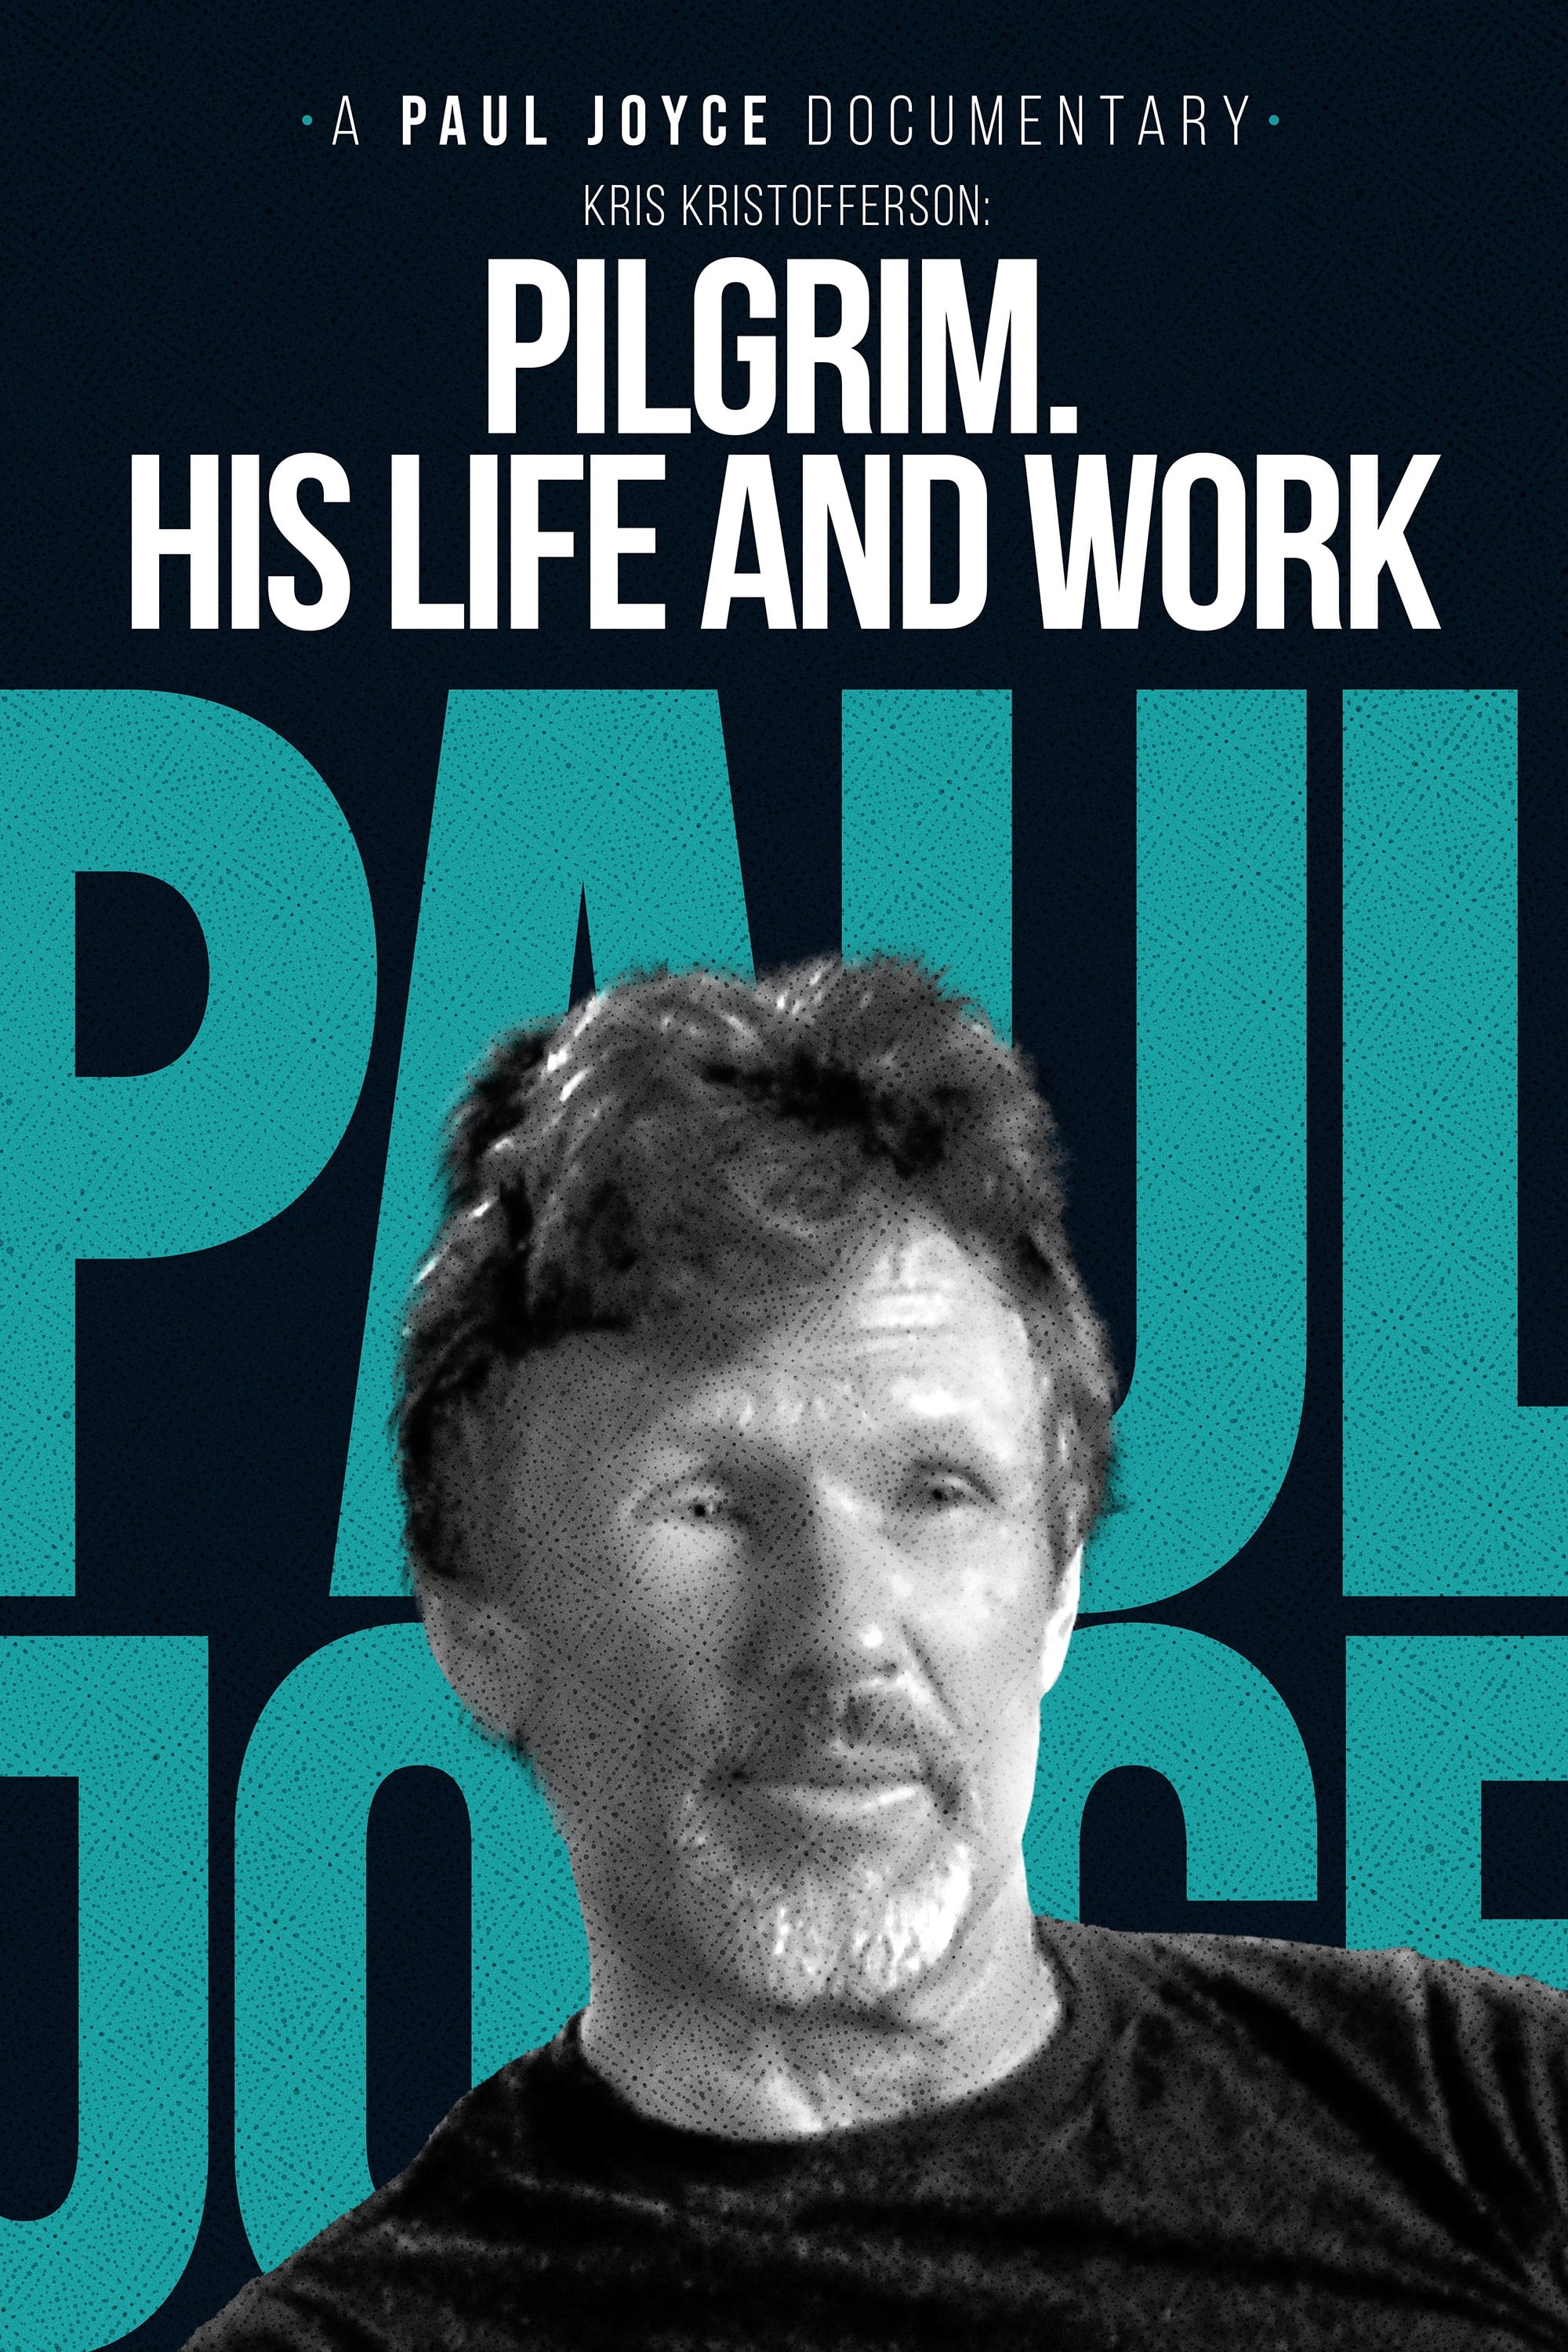 Kris Kristofferson: His Life and Work (1993)